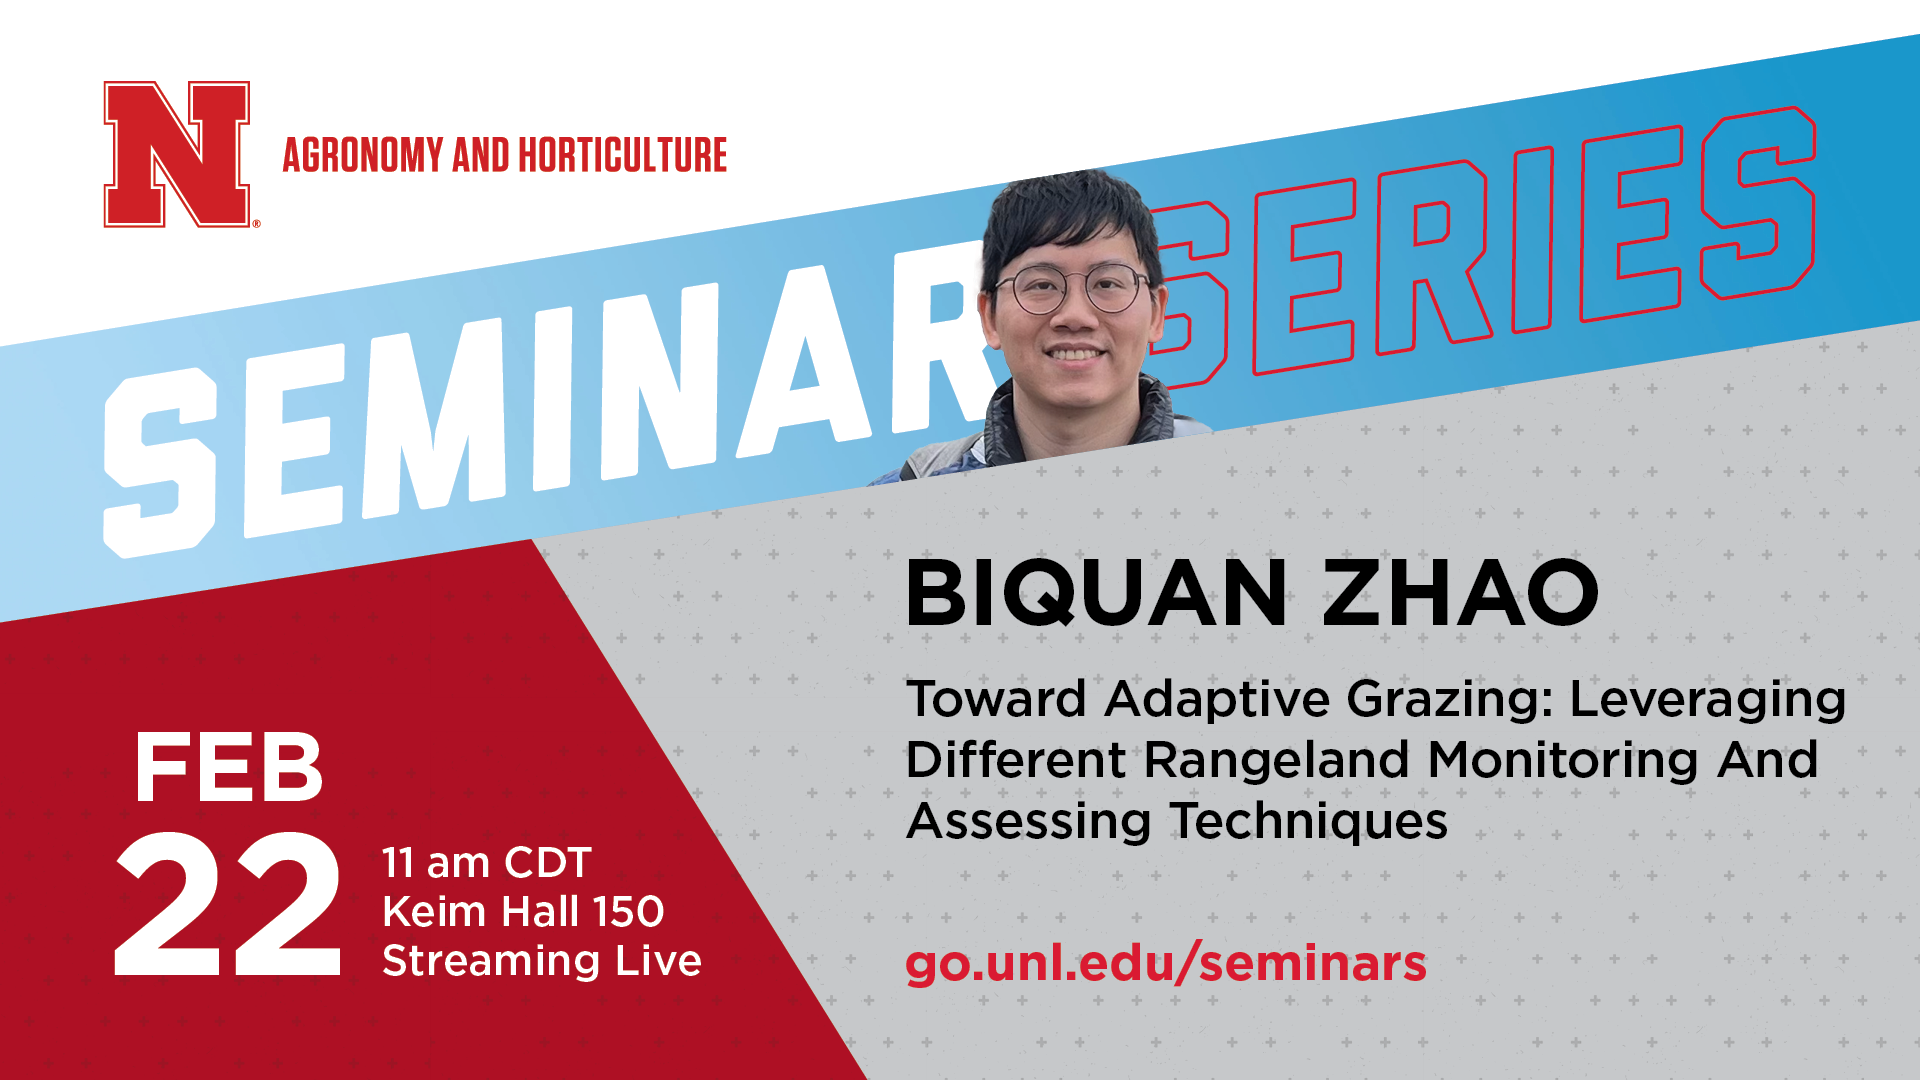 BIQUAN ZHAO, postdoctoral research associate, Department of Animal Science, University of Nebraska–Lincoln, will present "Toward Adaptive Grazing: Leveraging Different Rangeland Monitoring And Assessing Techniques," on Thursday, Feb. 22.